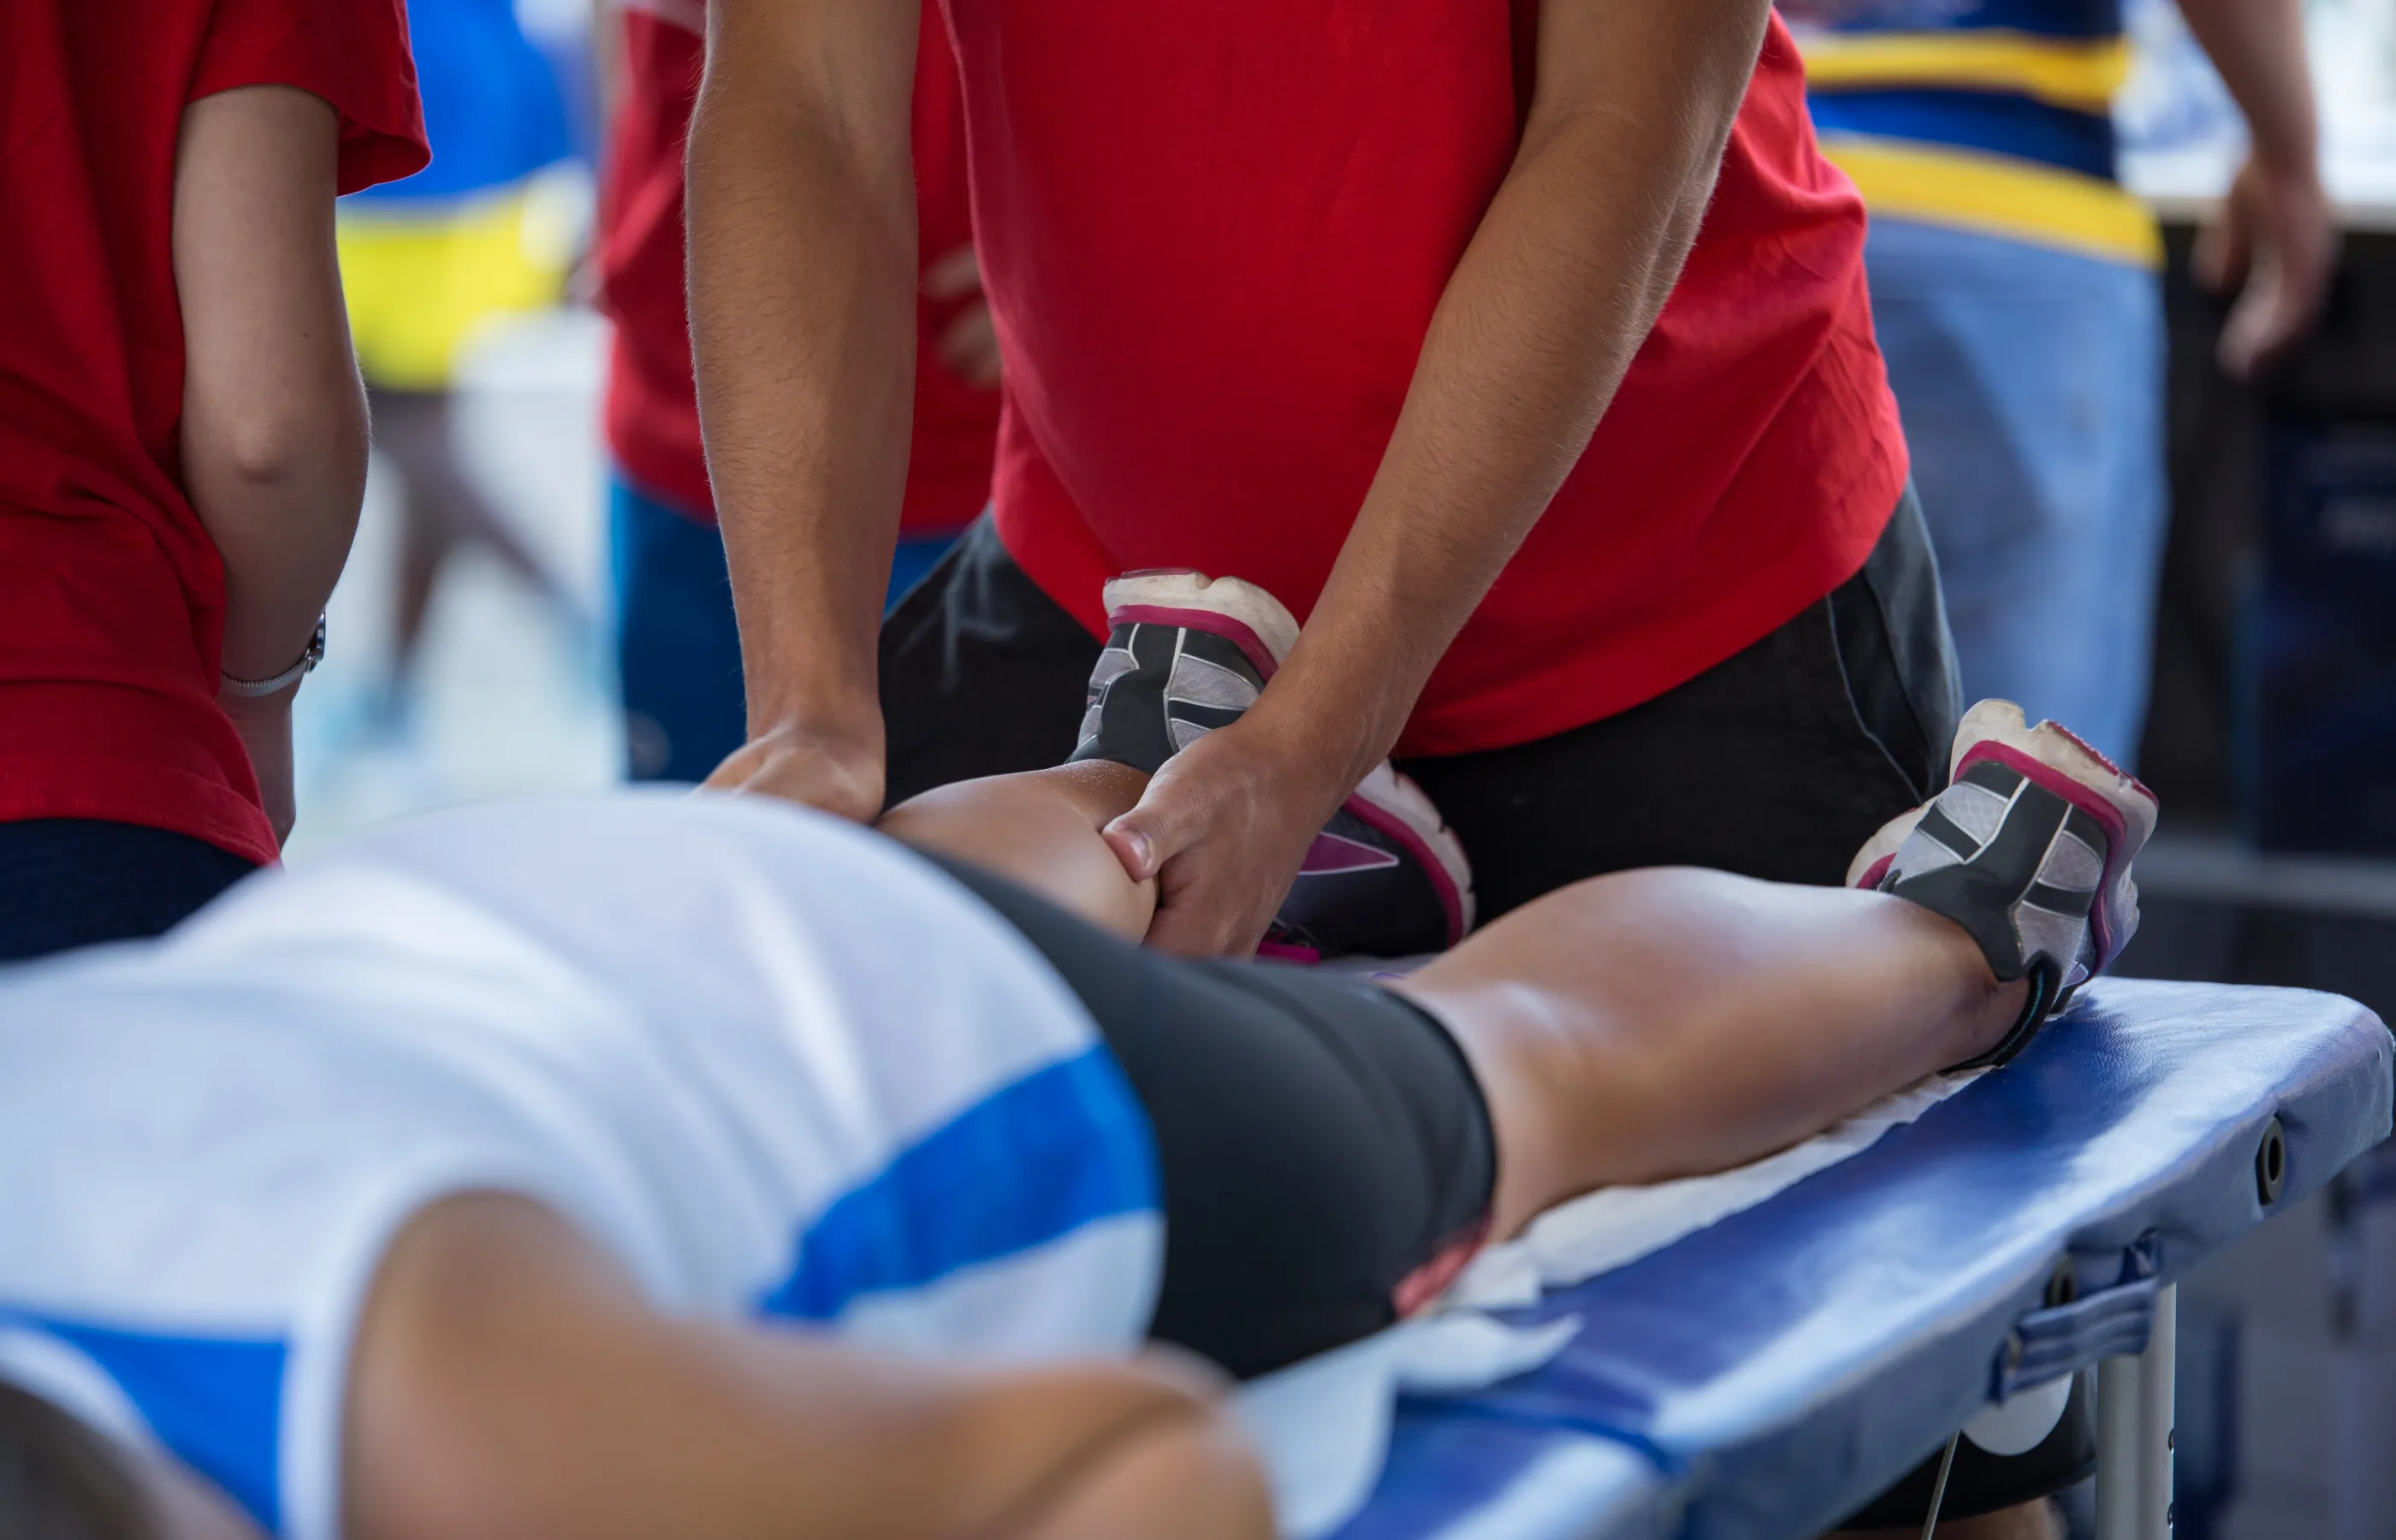 A team member is assisting a patient at an athletic event. 